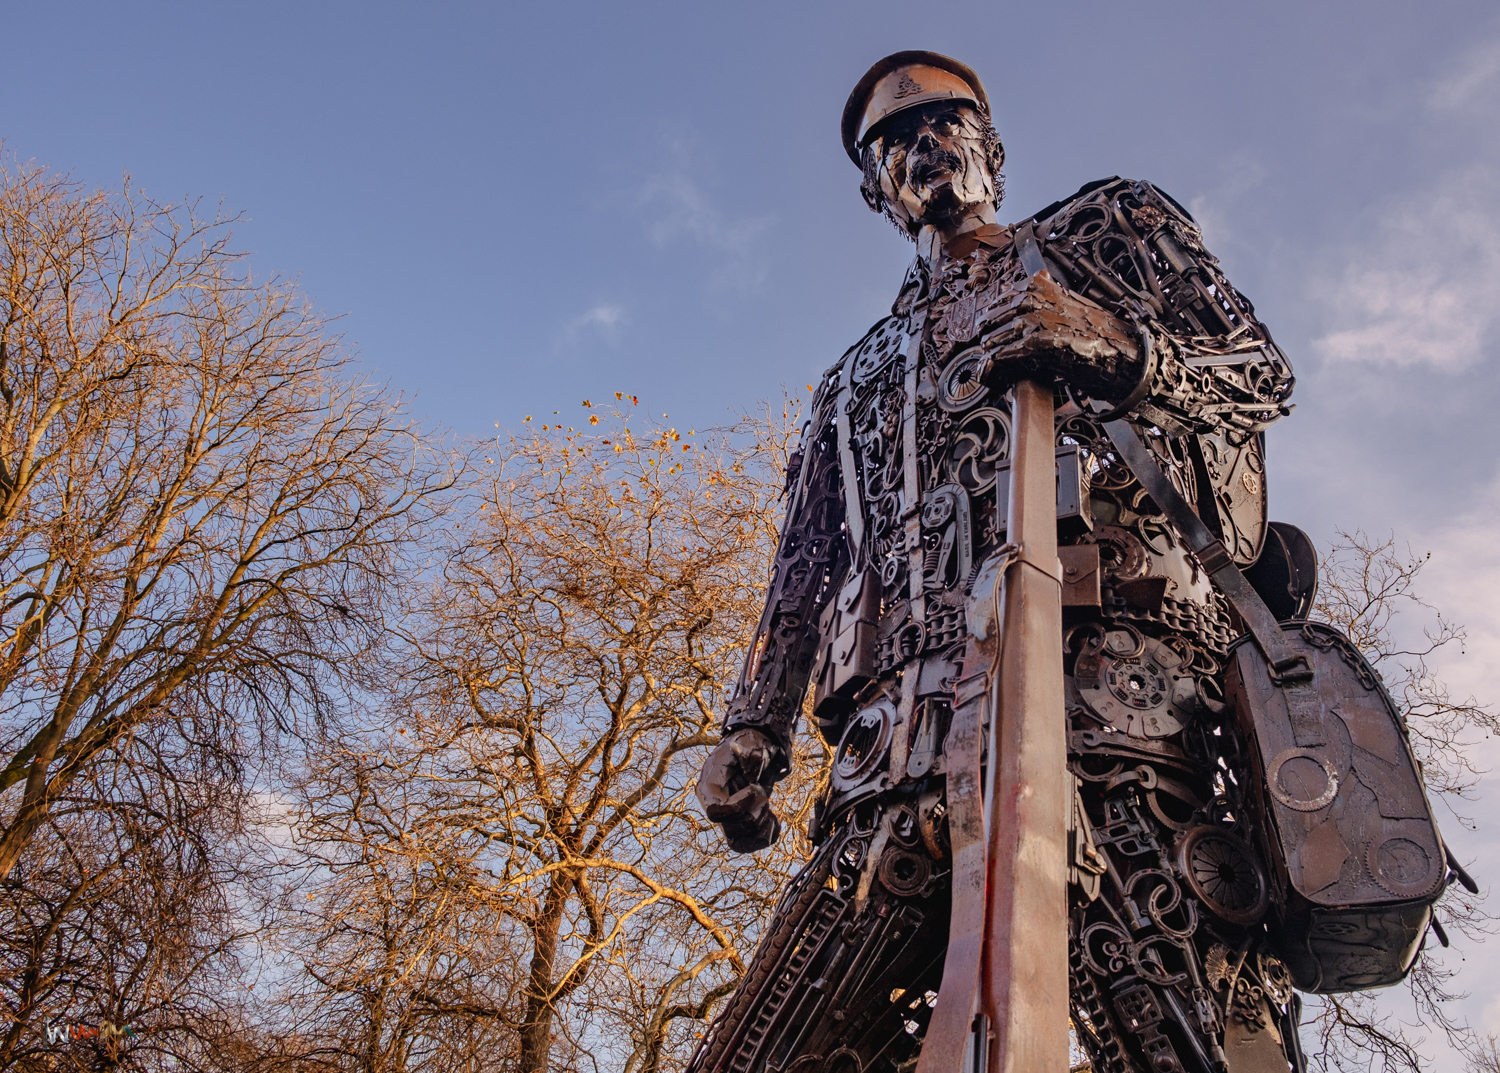 ‘The Hauntings Soldier’ in St. Stephen’s Green in 2018. By Martin Galbavy and Chris Hannam. A centenary commemoration of global warfare served to remind me that the life expectancy of war far exceeds the hostilities.